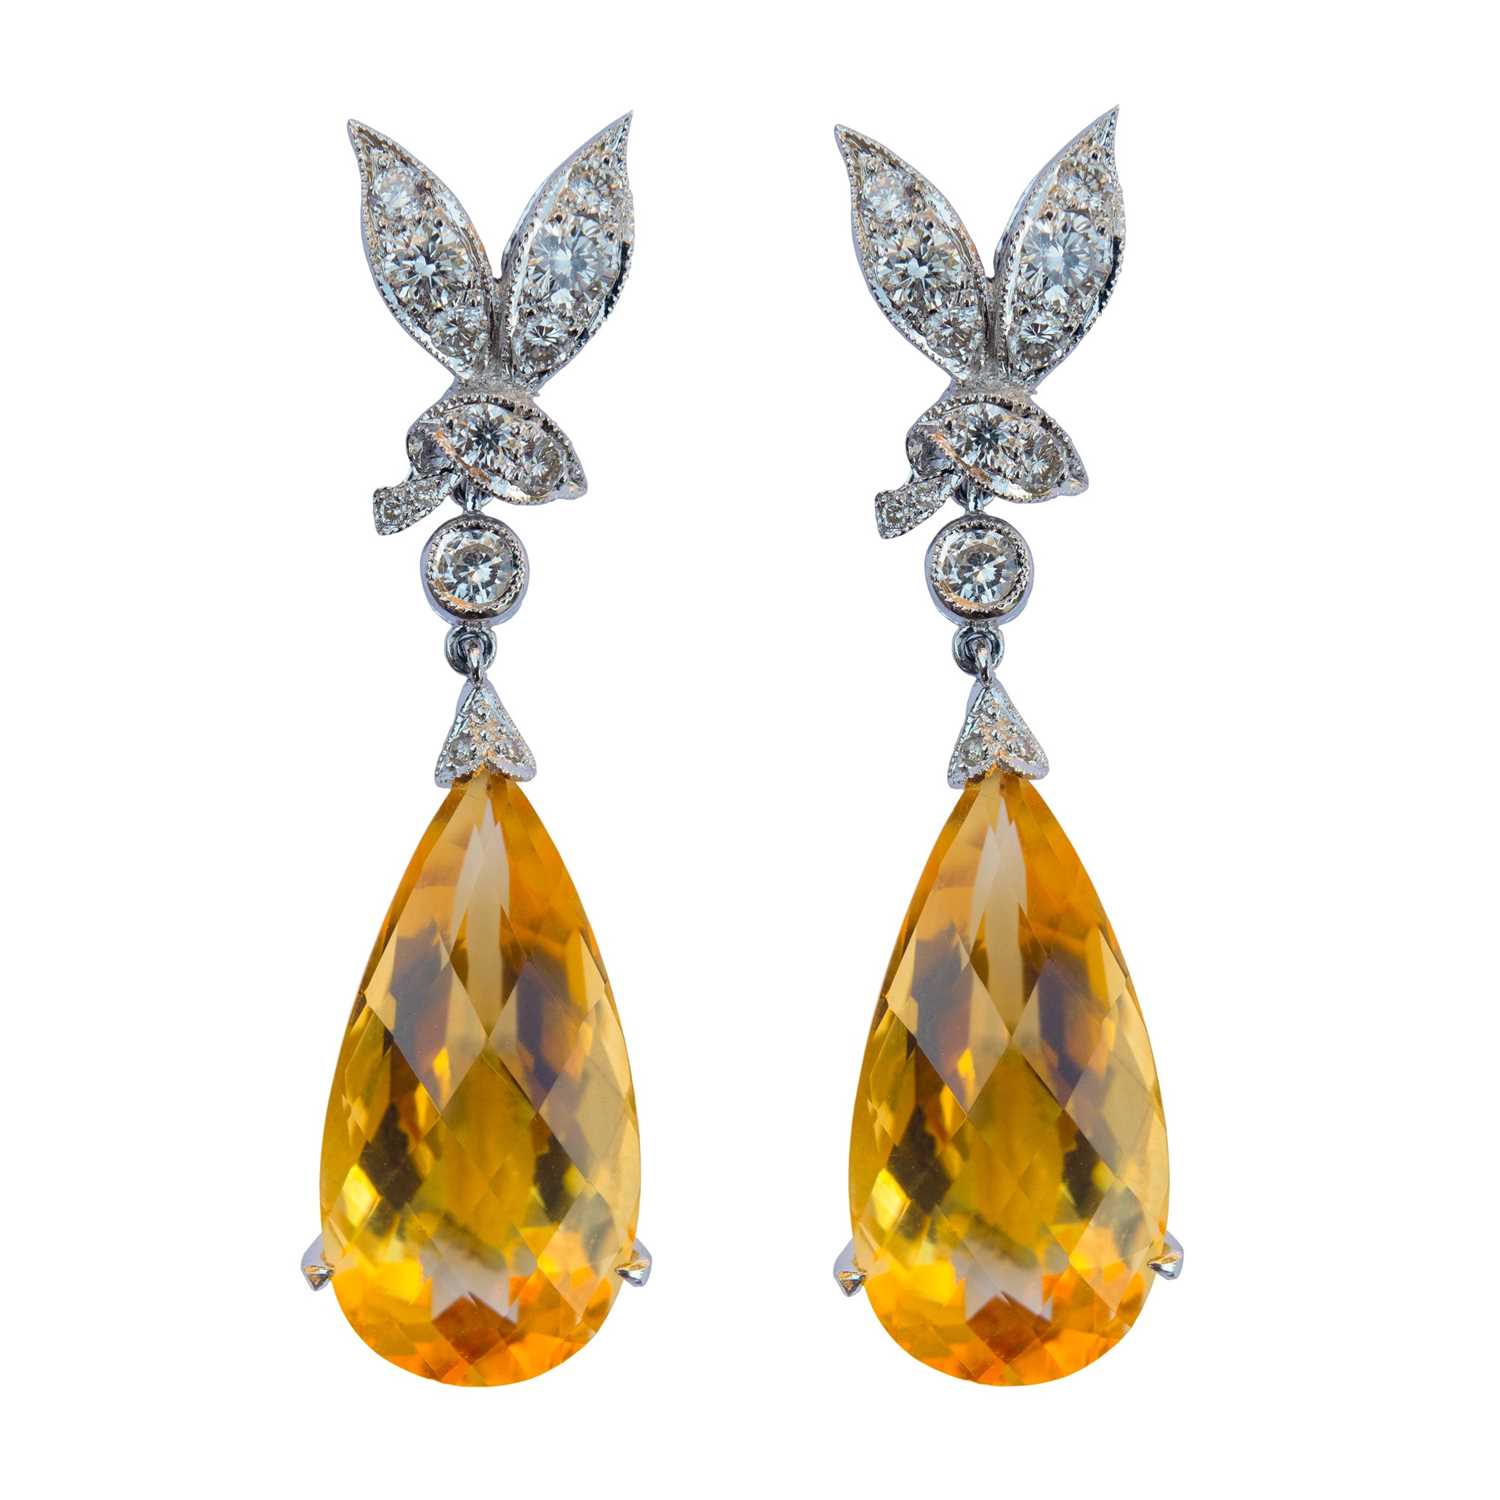 A pair of 18ct white gold, citrine and diamond drop earrings.